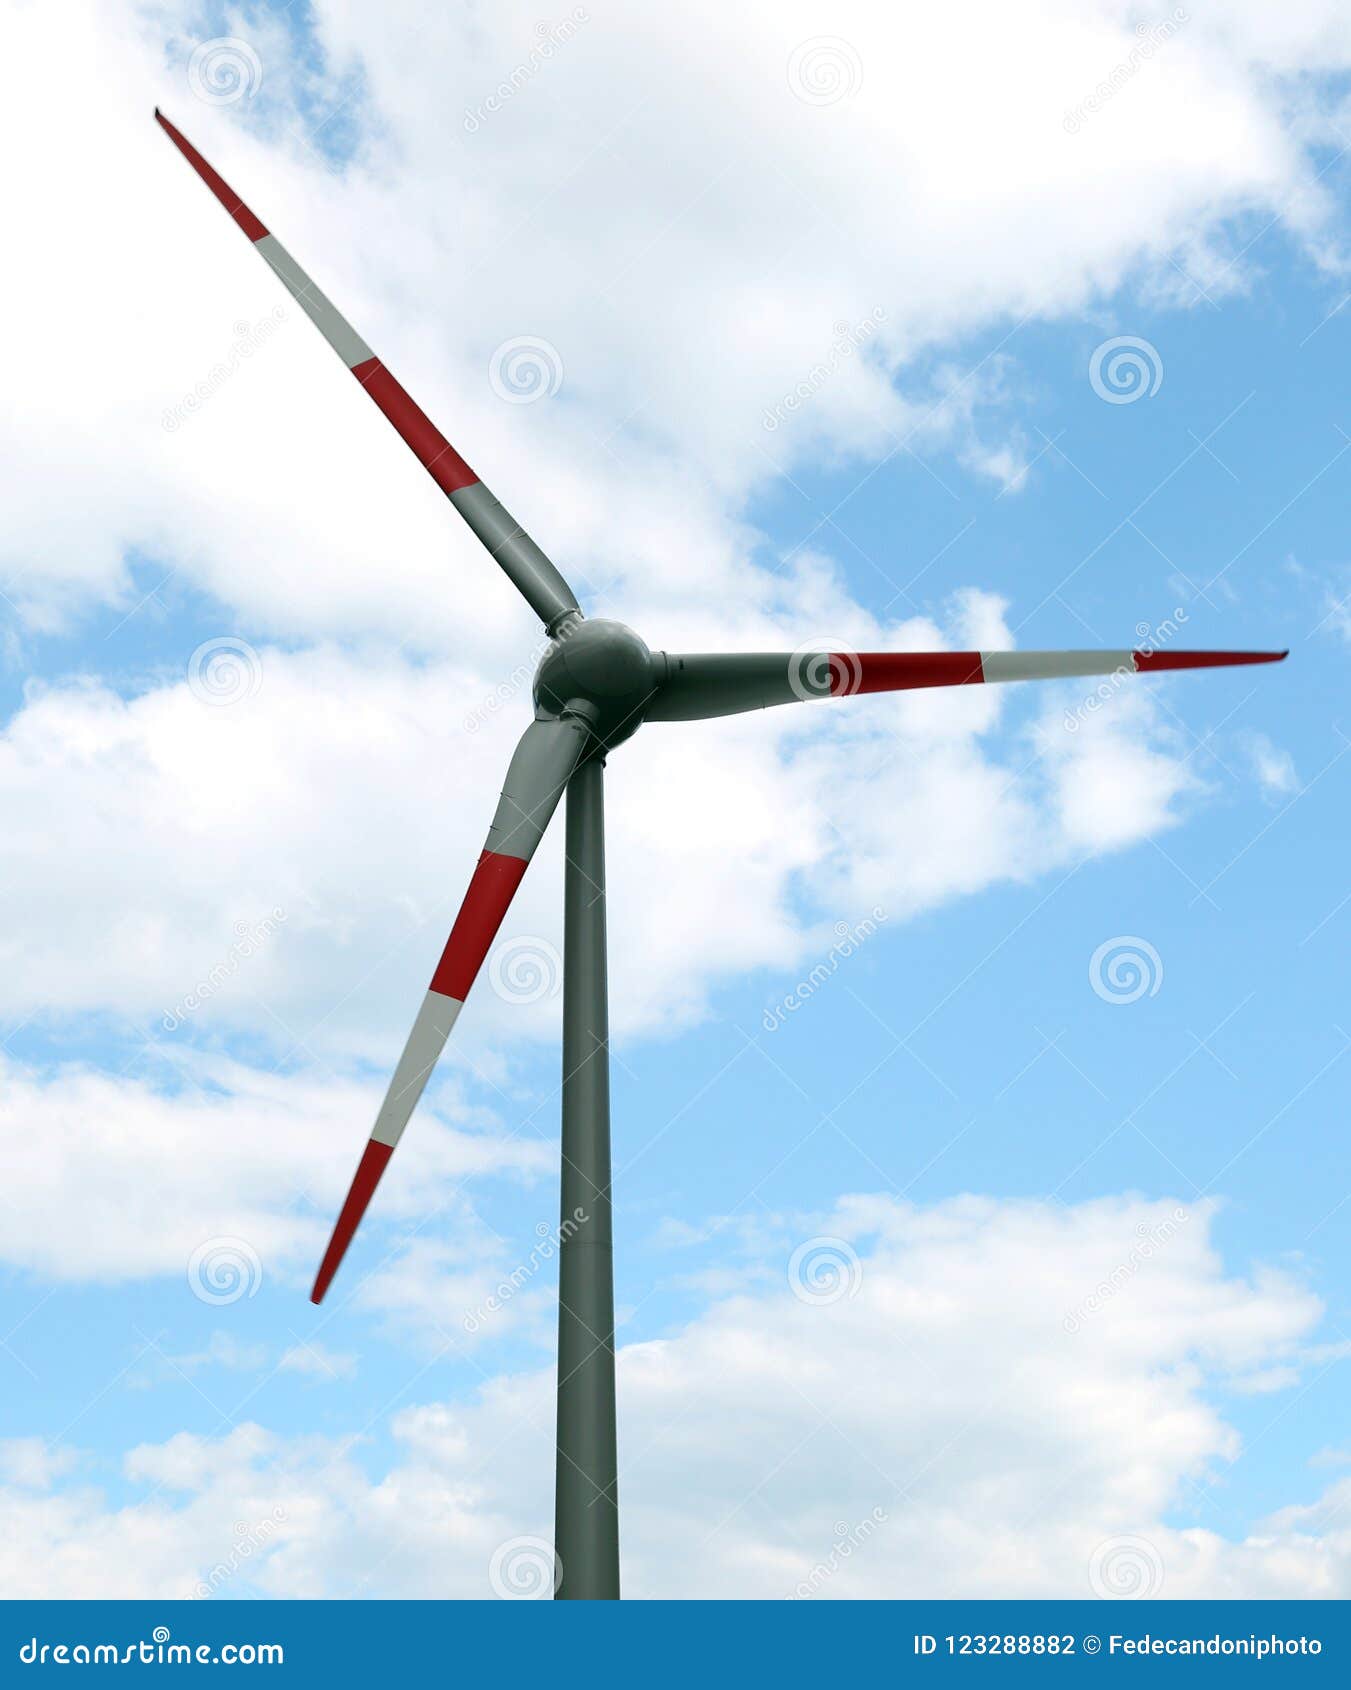 wind turbine used to produce clean energy with the wind